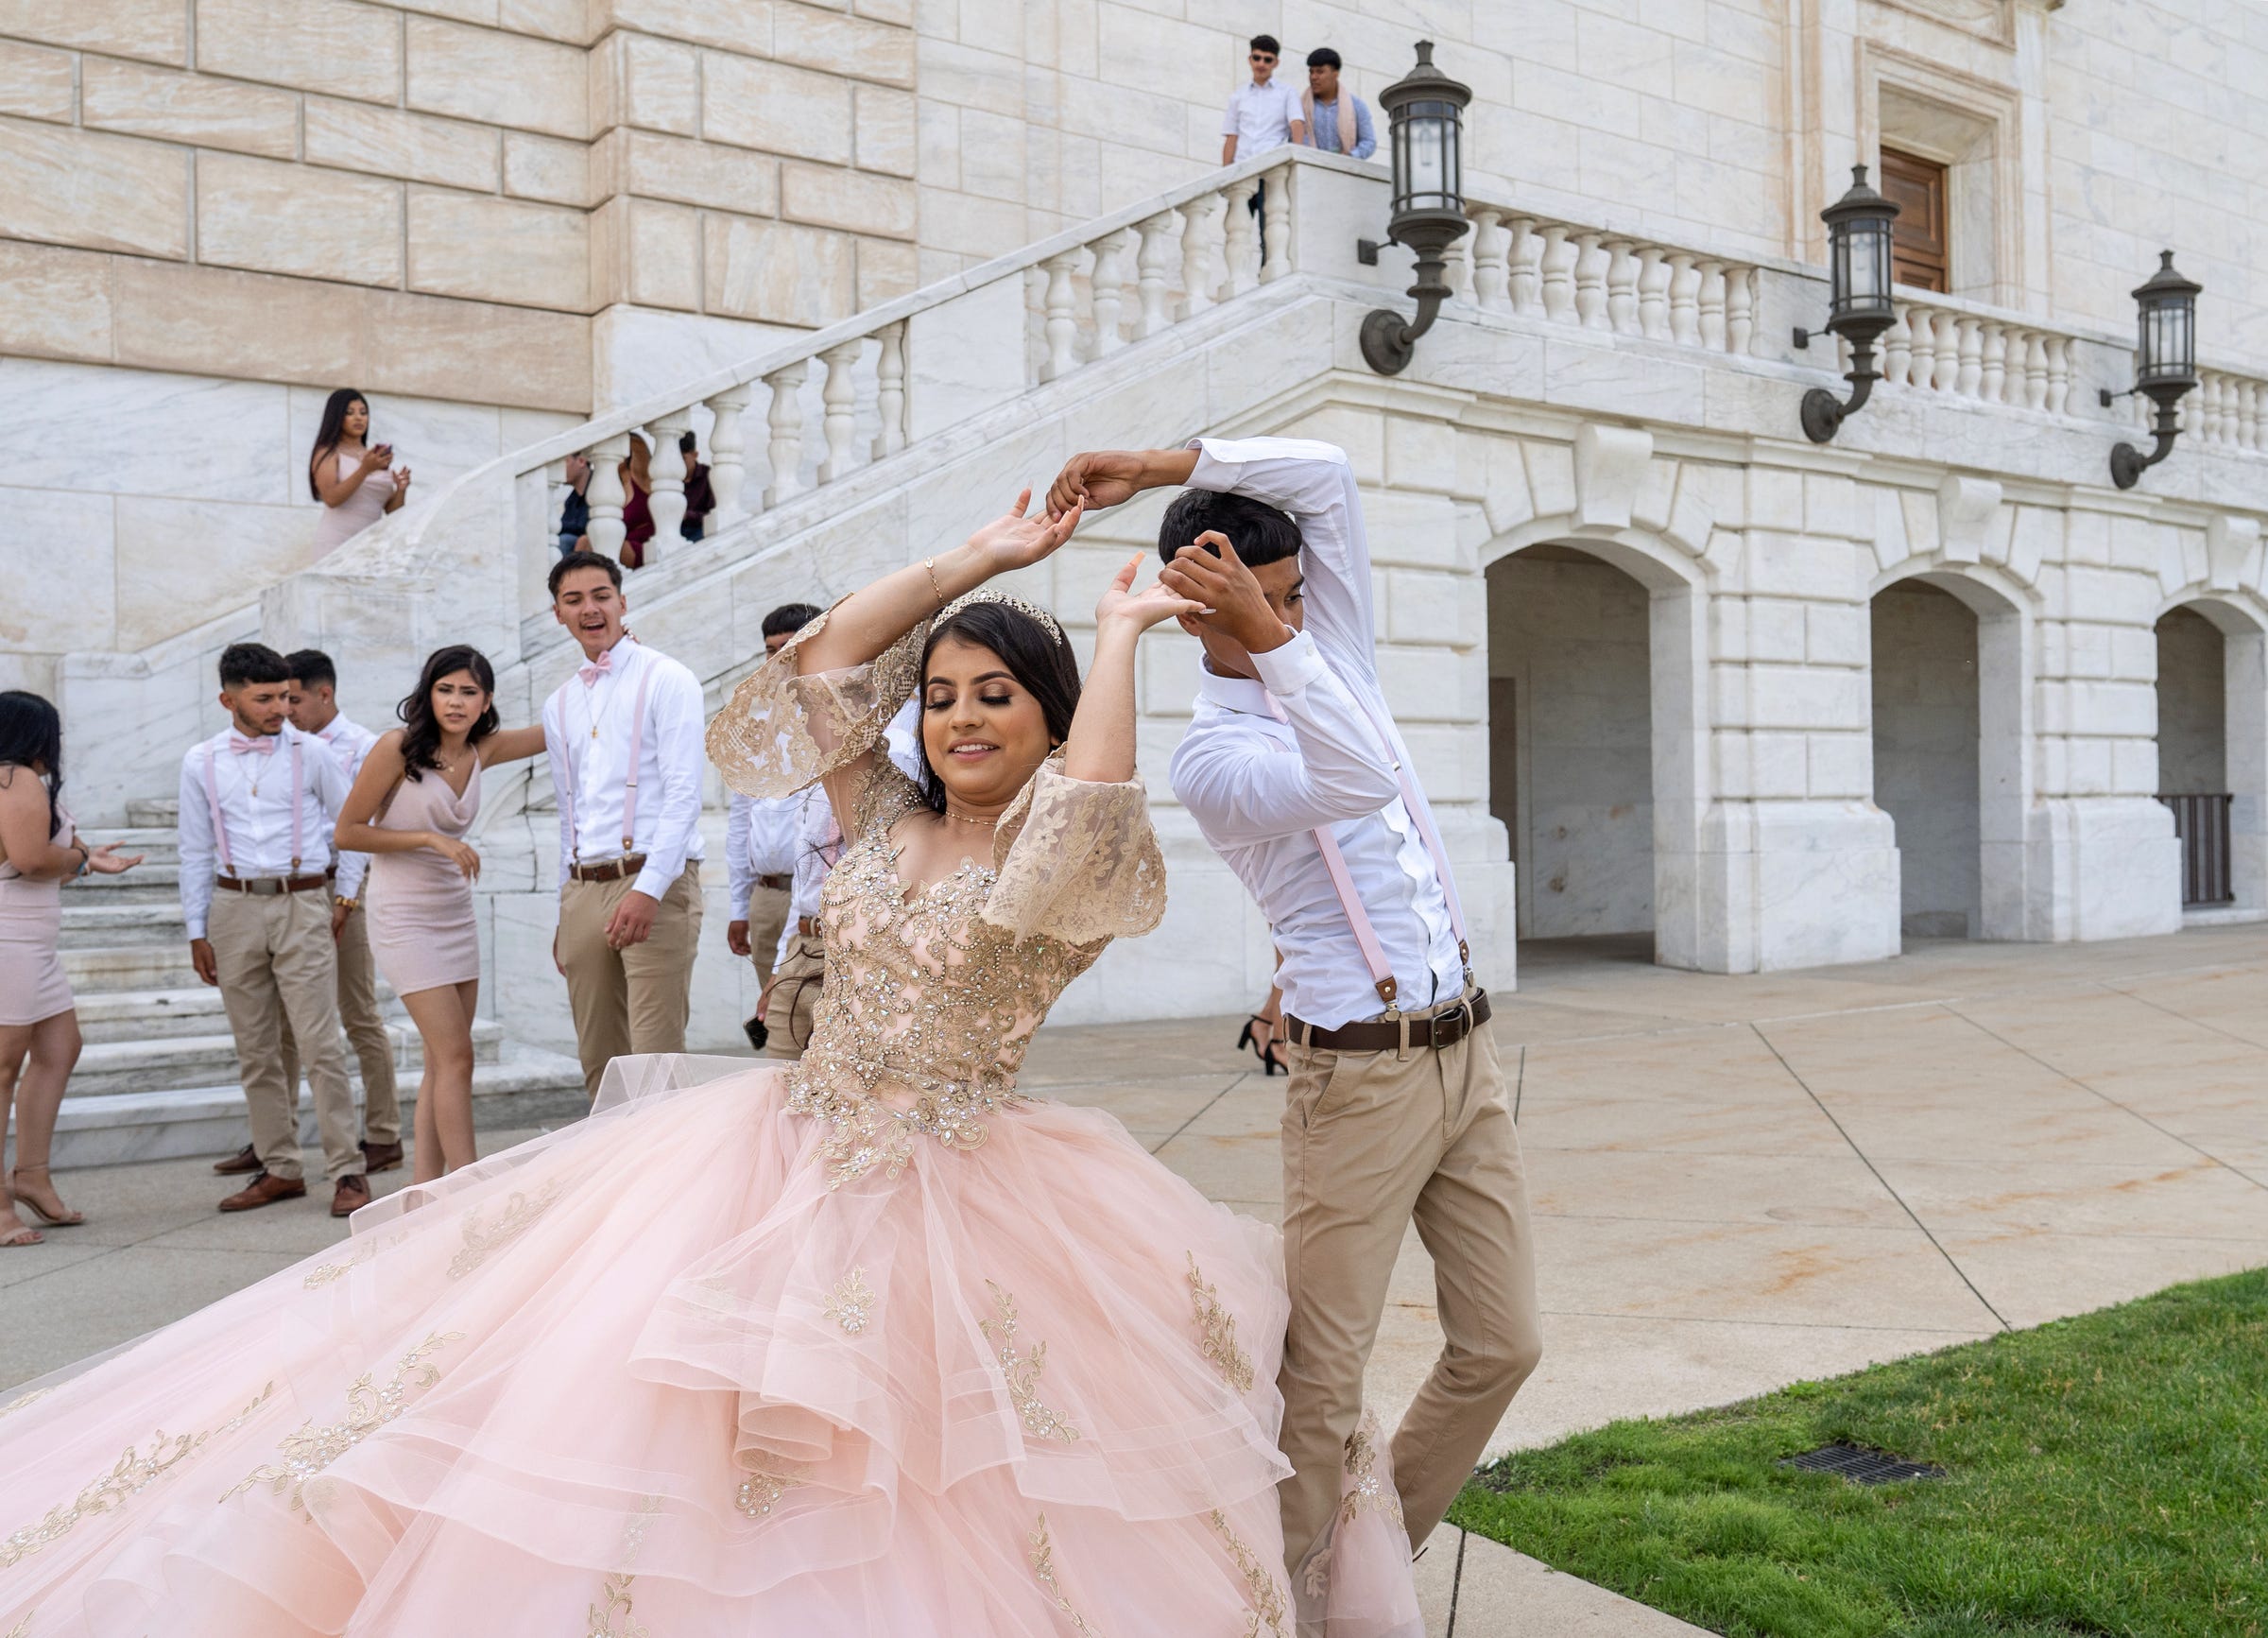 Estefania Velazquez of Detroit practices her dance with the court of honor while stopping for a photo shoot at the staircase at the rear of the Detroit Institute of Arts on Friday, June 18, 2021.